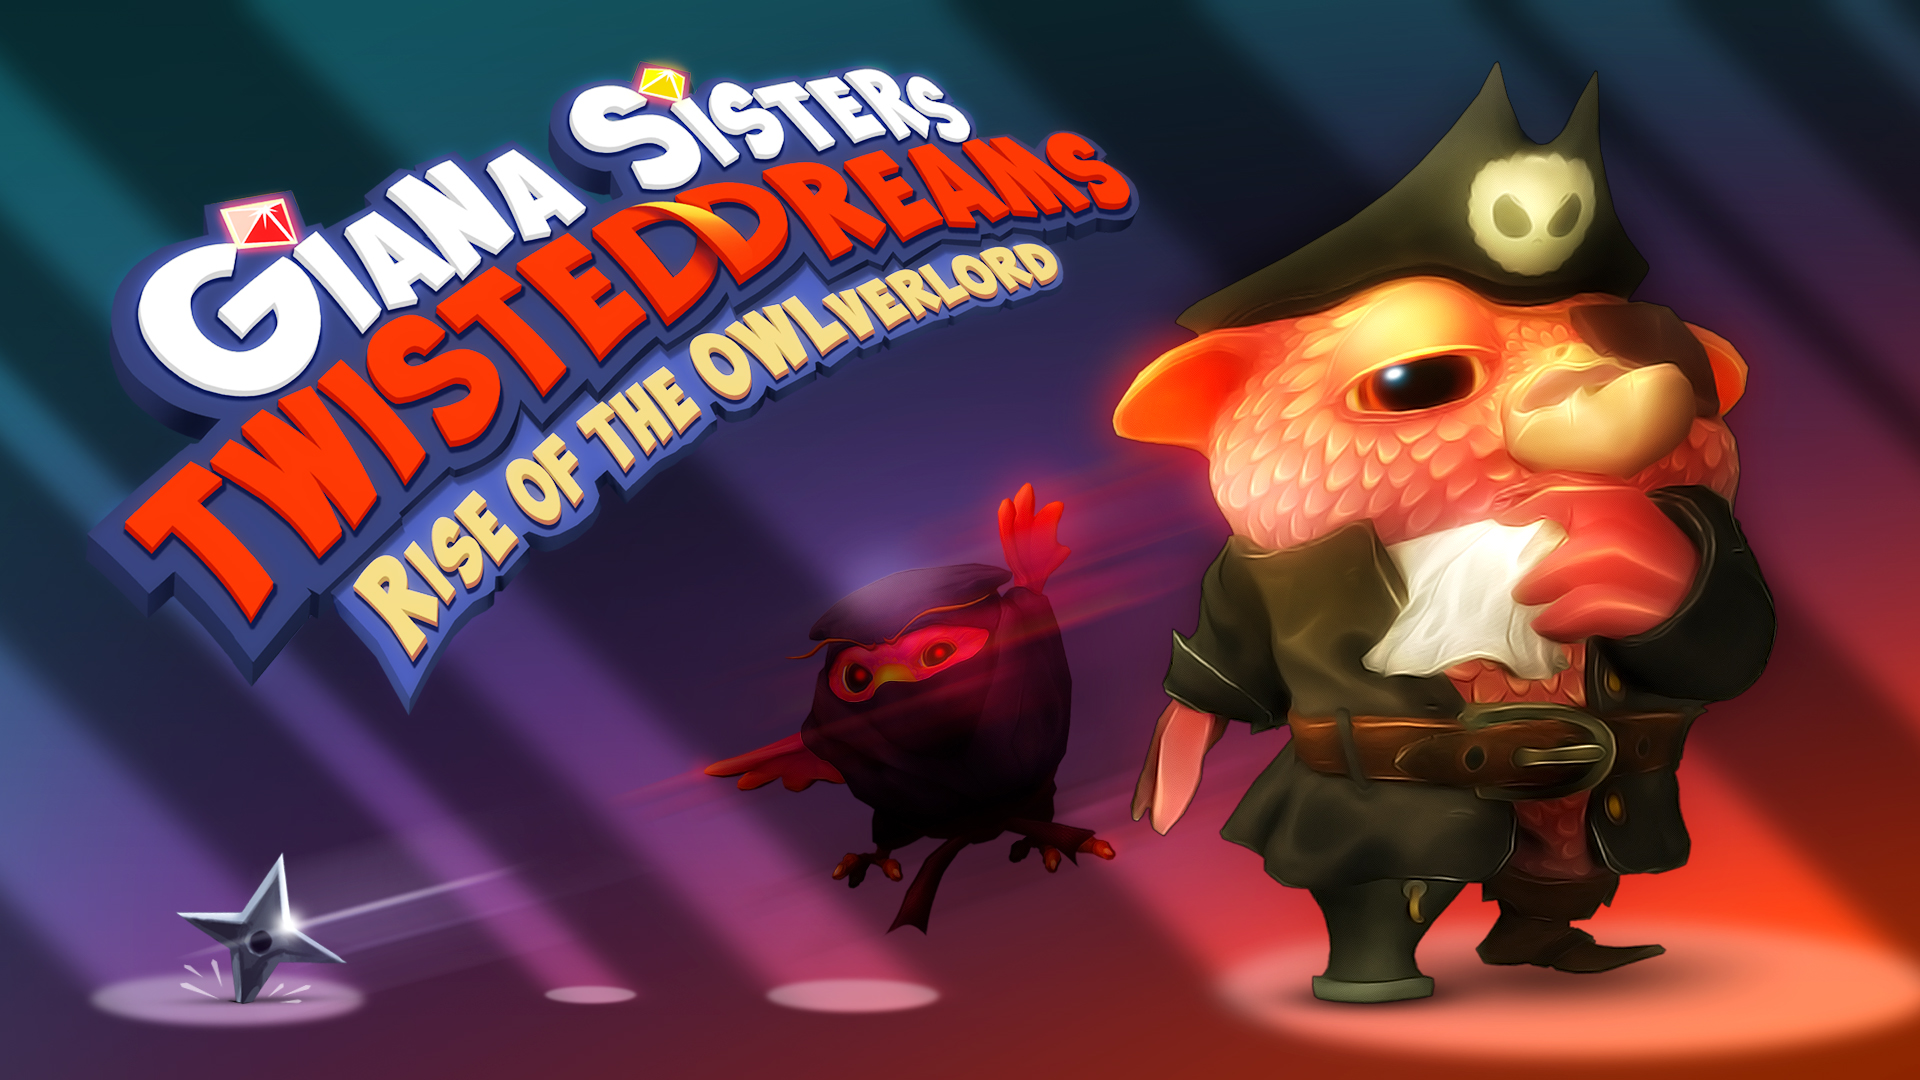 Giana Sisters: Twisted Dreams: Rise of the Owlverlord